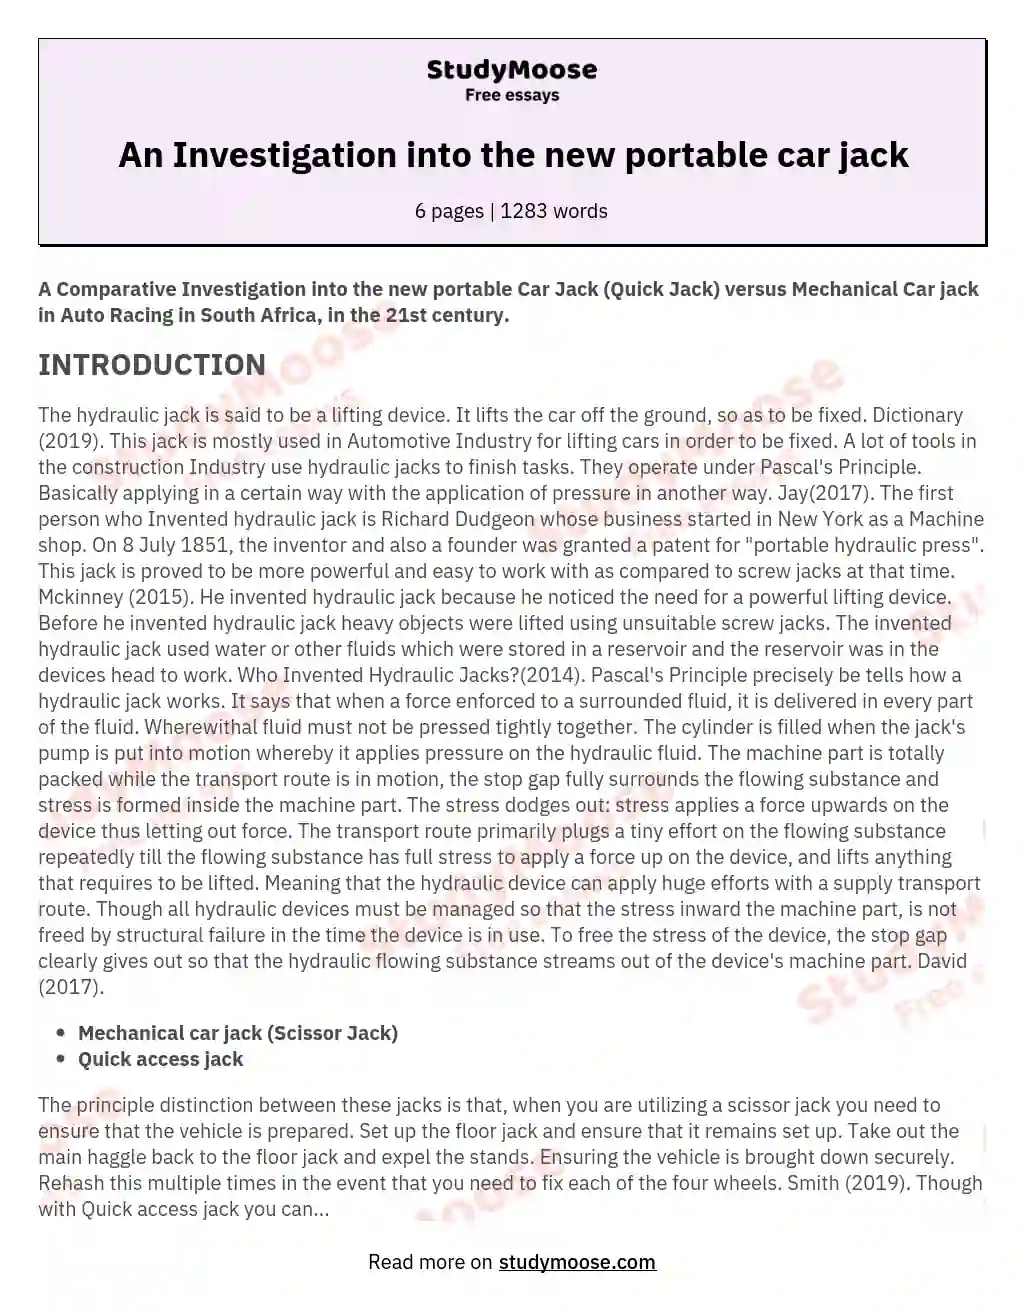 An Investigation into the new portable car jack essay